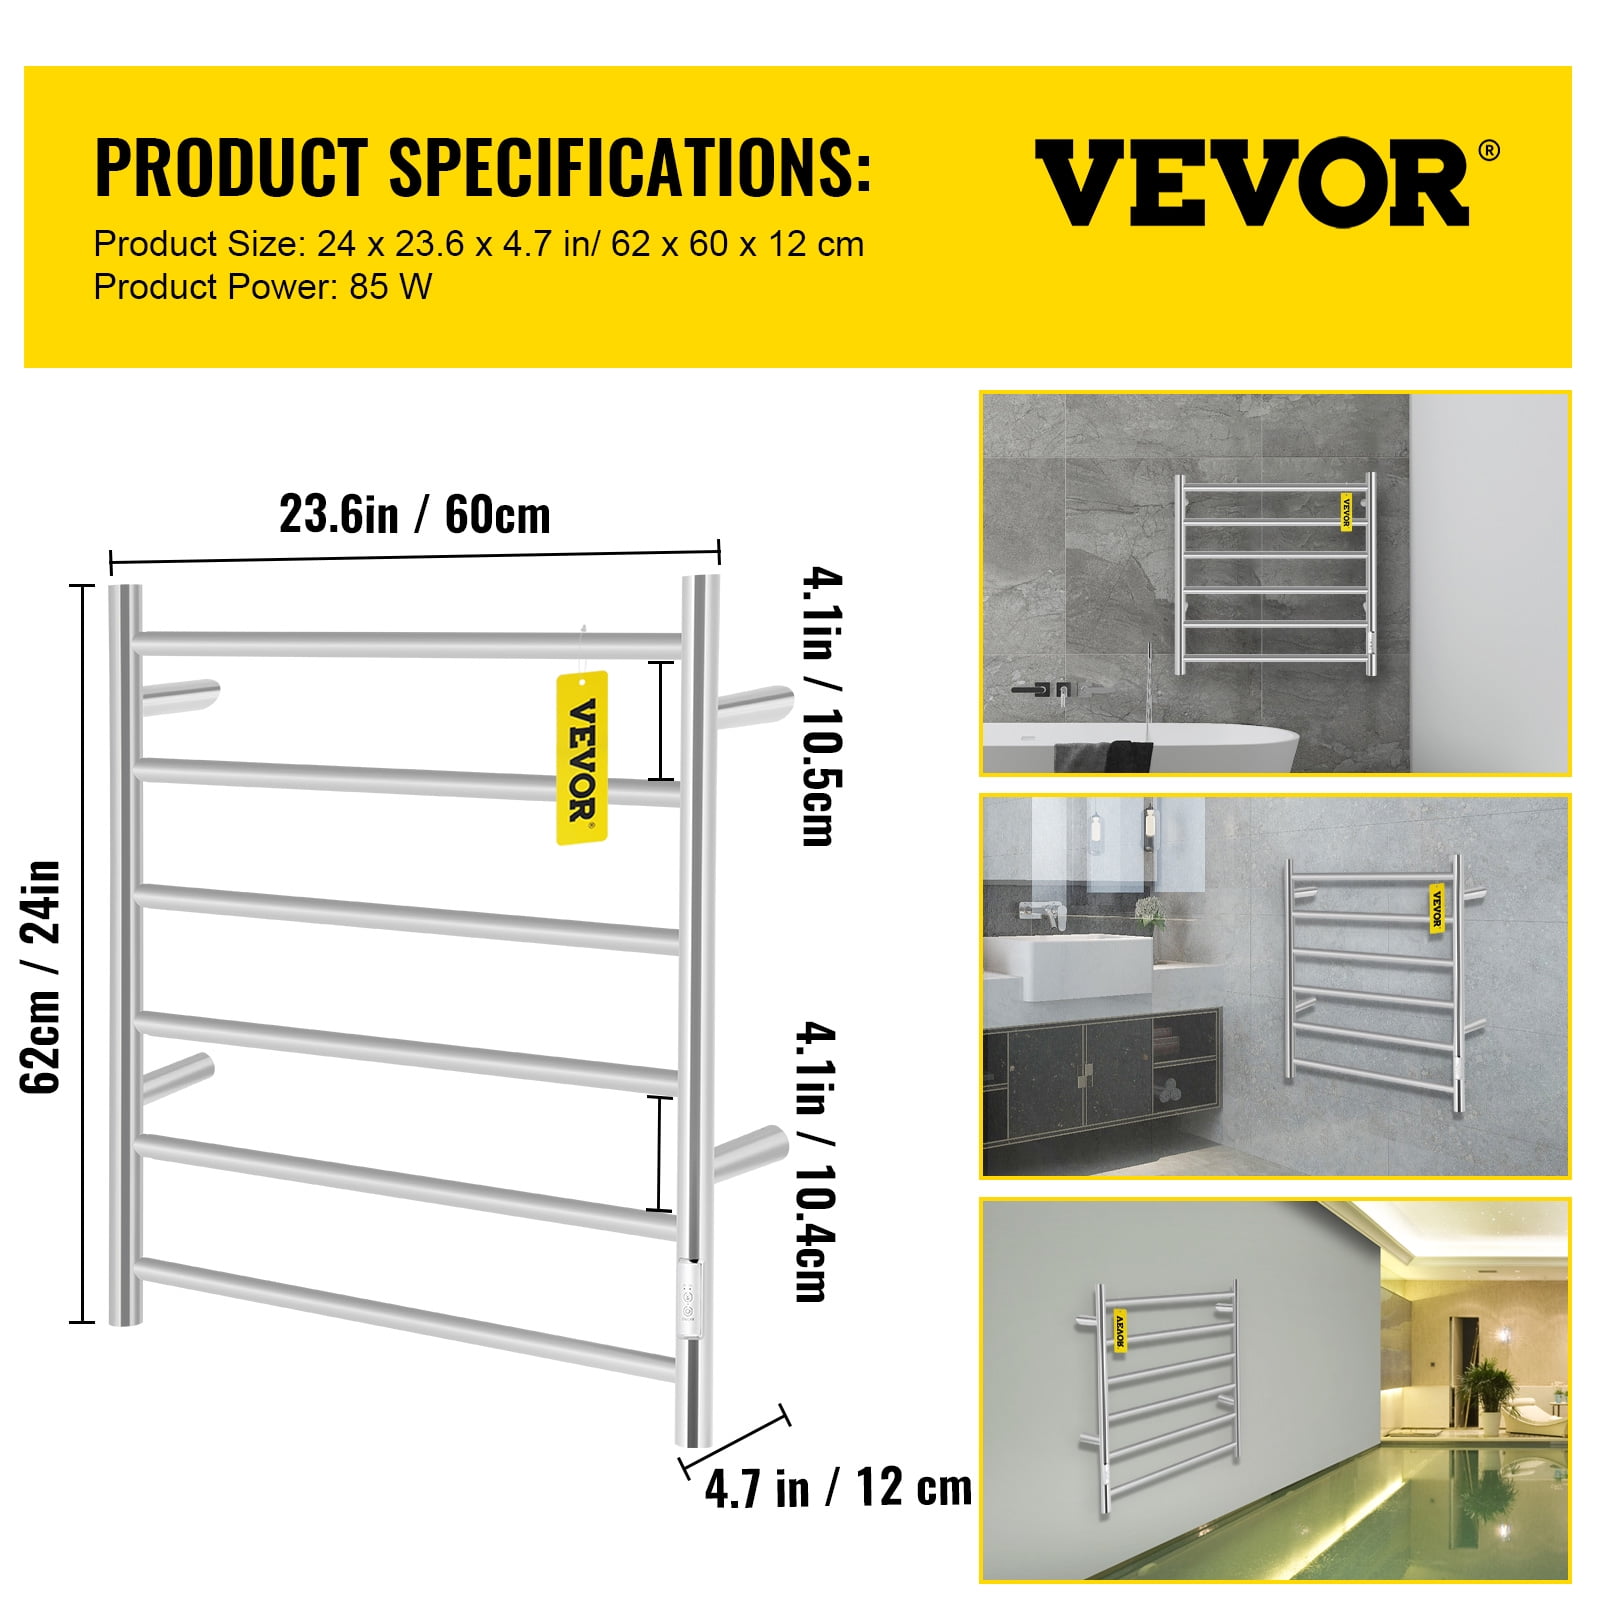 VEVOR Heated Towel Rack, 12-Bar Towel Warmer Rack, Wall Mounted Electric Towel Warmer, Electric Towel Drying Rack with Timer, Polished Stainless Steel